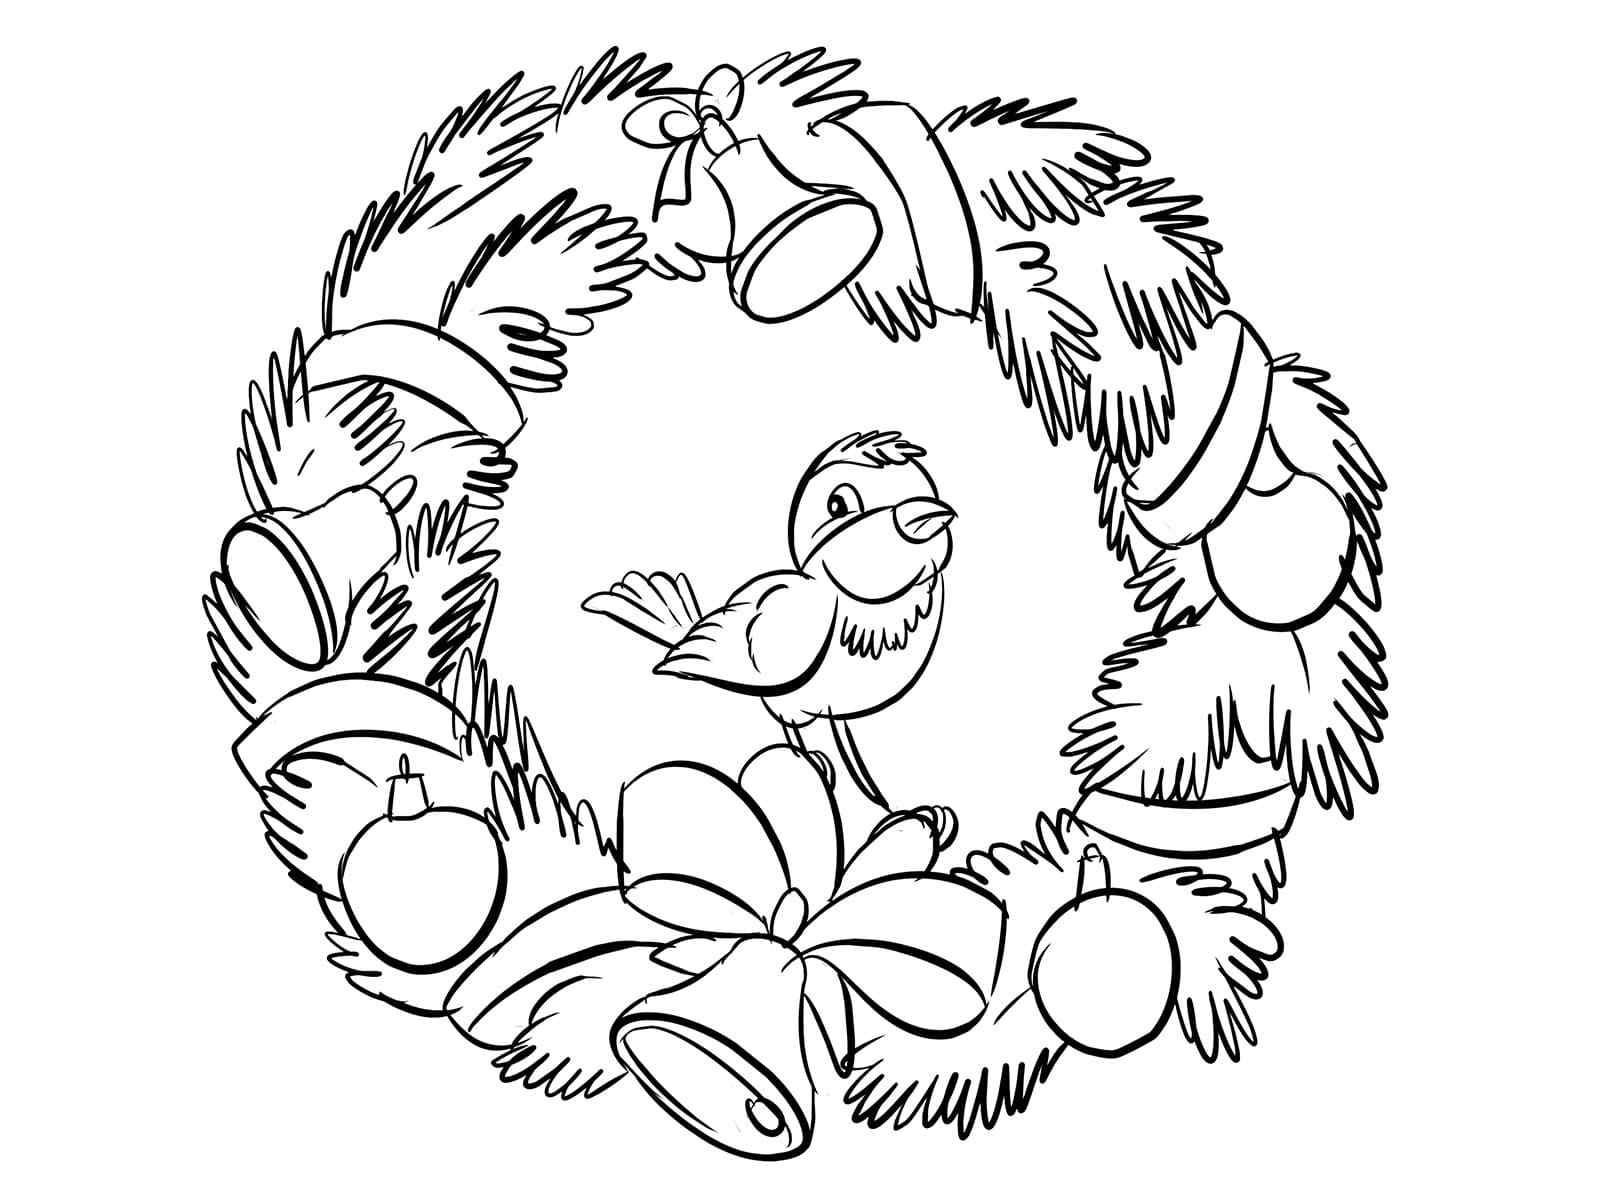 To Sit On The Wreath Coloring Page